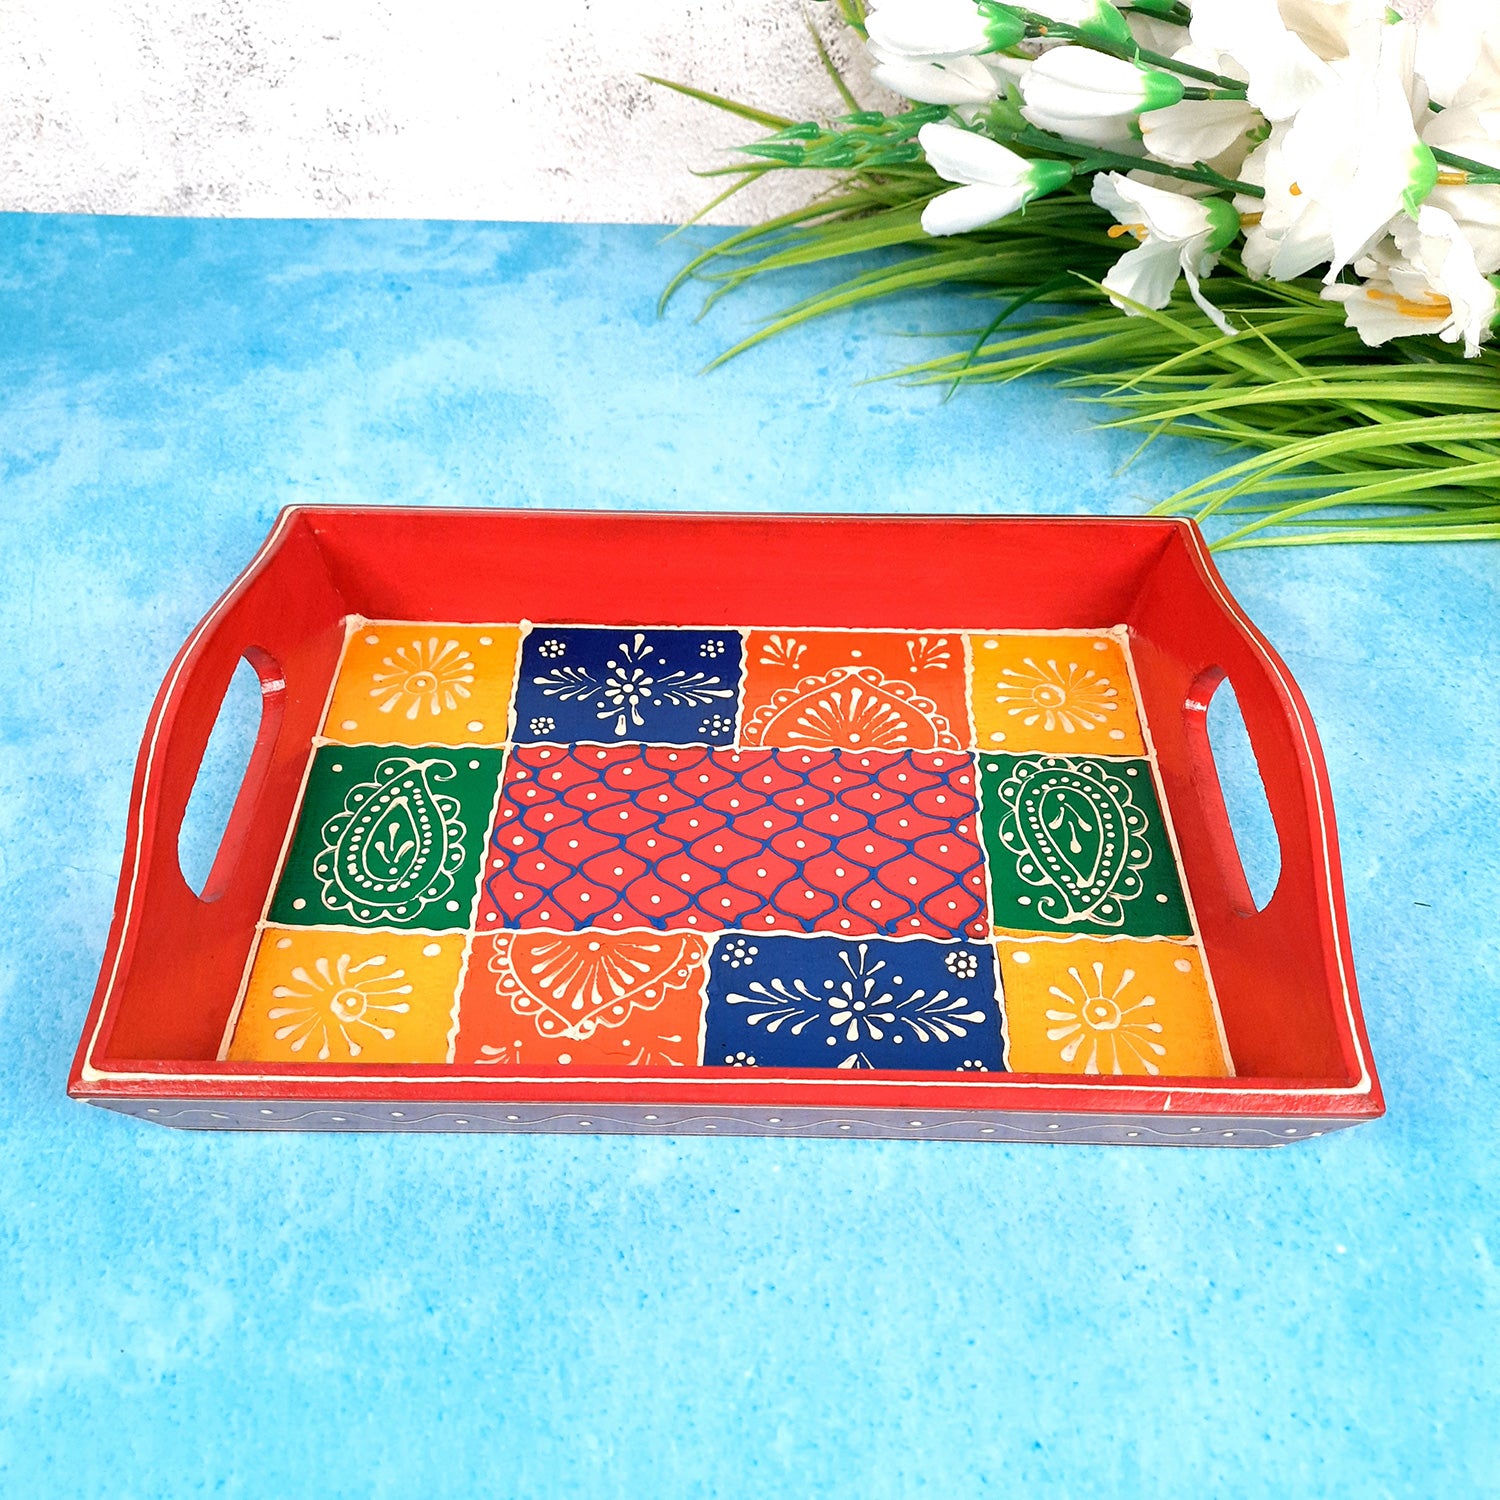 Serving Tray | Wooden Tea Tray - For Home, Kitchen, Dining Table Decor & Gift - 11 Inch - apkamart #Style_Pack of 1